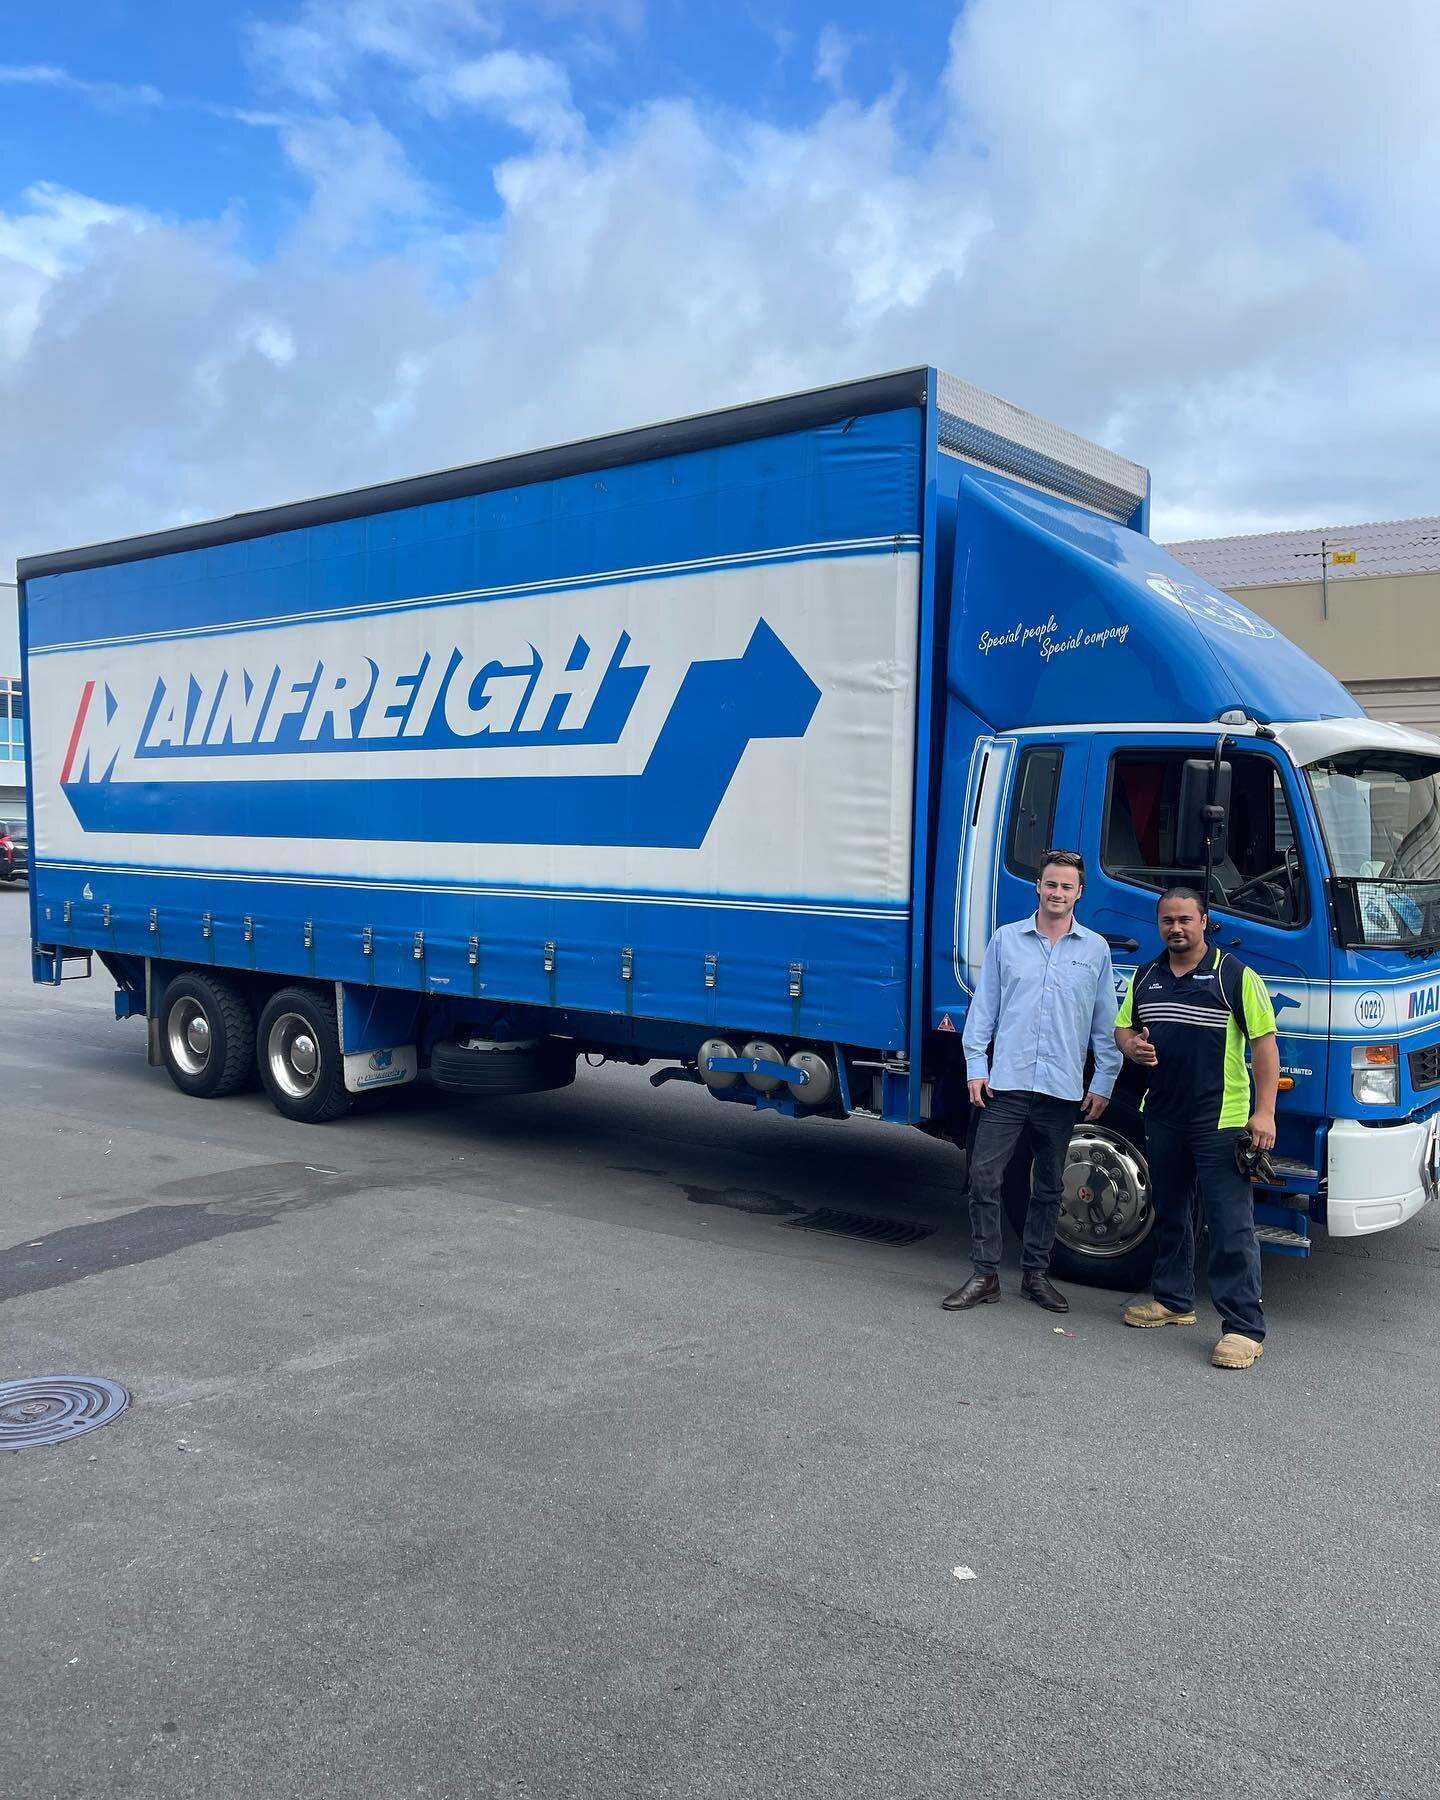 Our trucking client just purchased a new truck and we couldn't be more thrilled! This new truck will help them haul more products and serve their customers better. Need insurance for #transport, get in touch today!🚛
#transport #ownerdriver #civil #e